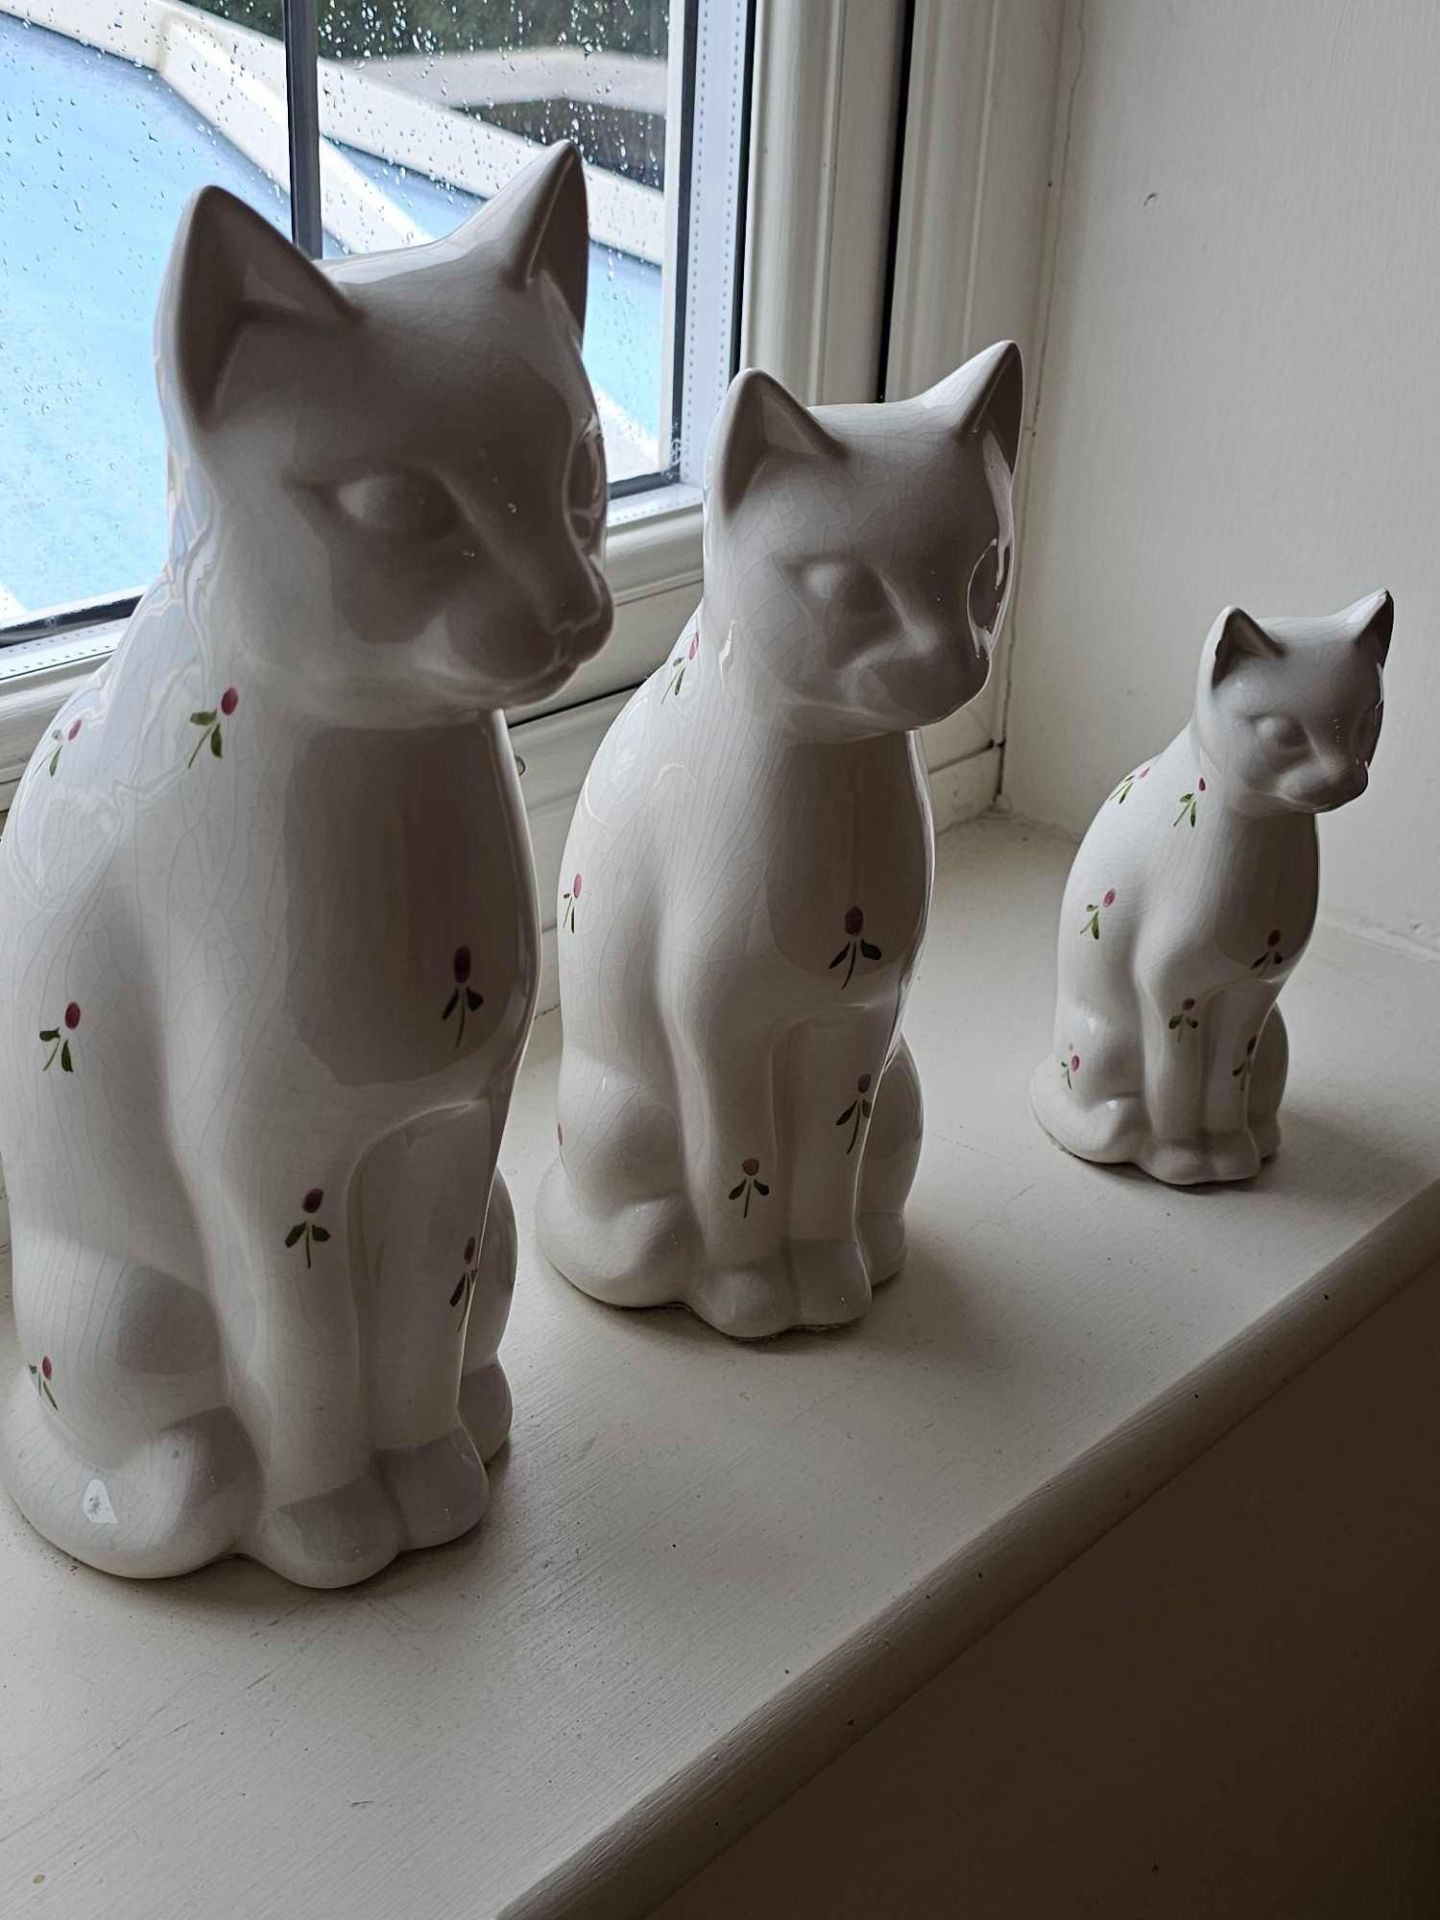 A Set Of 3 X Porcelain Figurines Of Cats 28, 23 And 17cm Respectively - Image 3 of 3